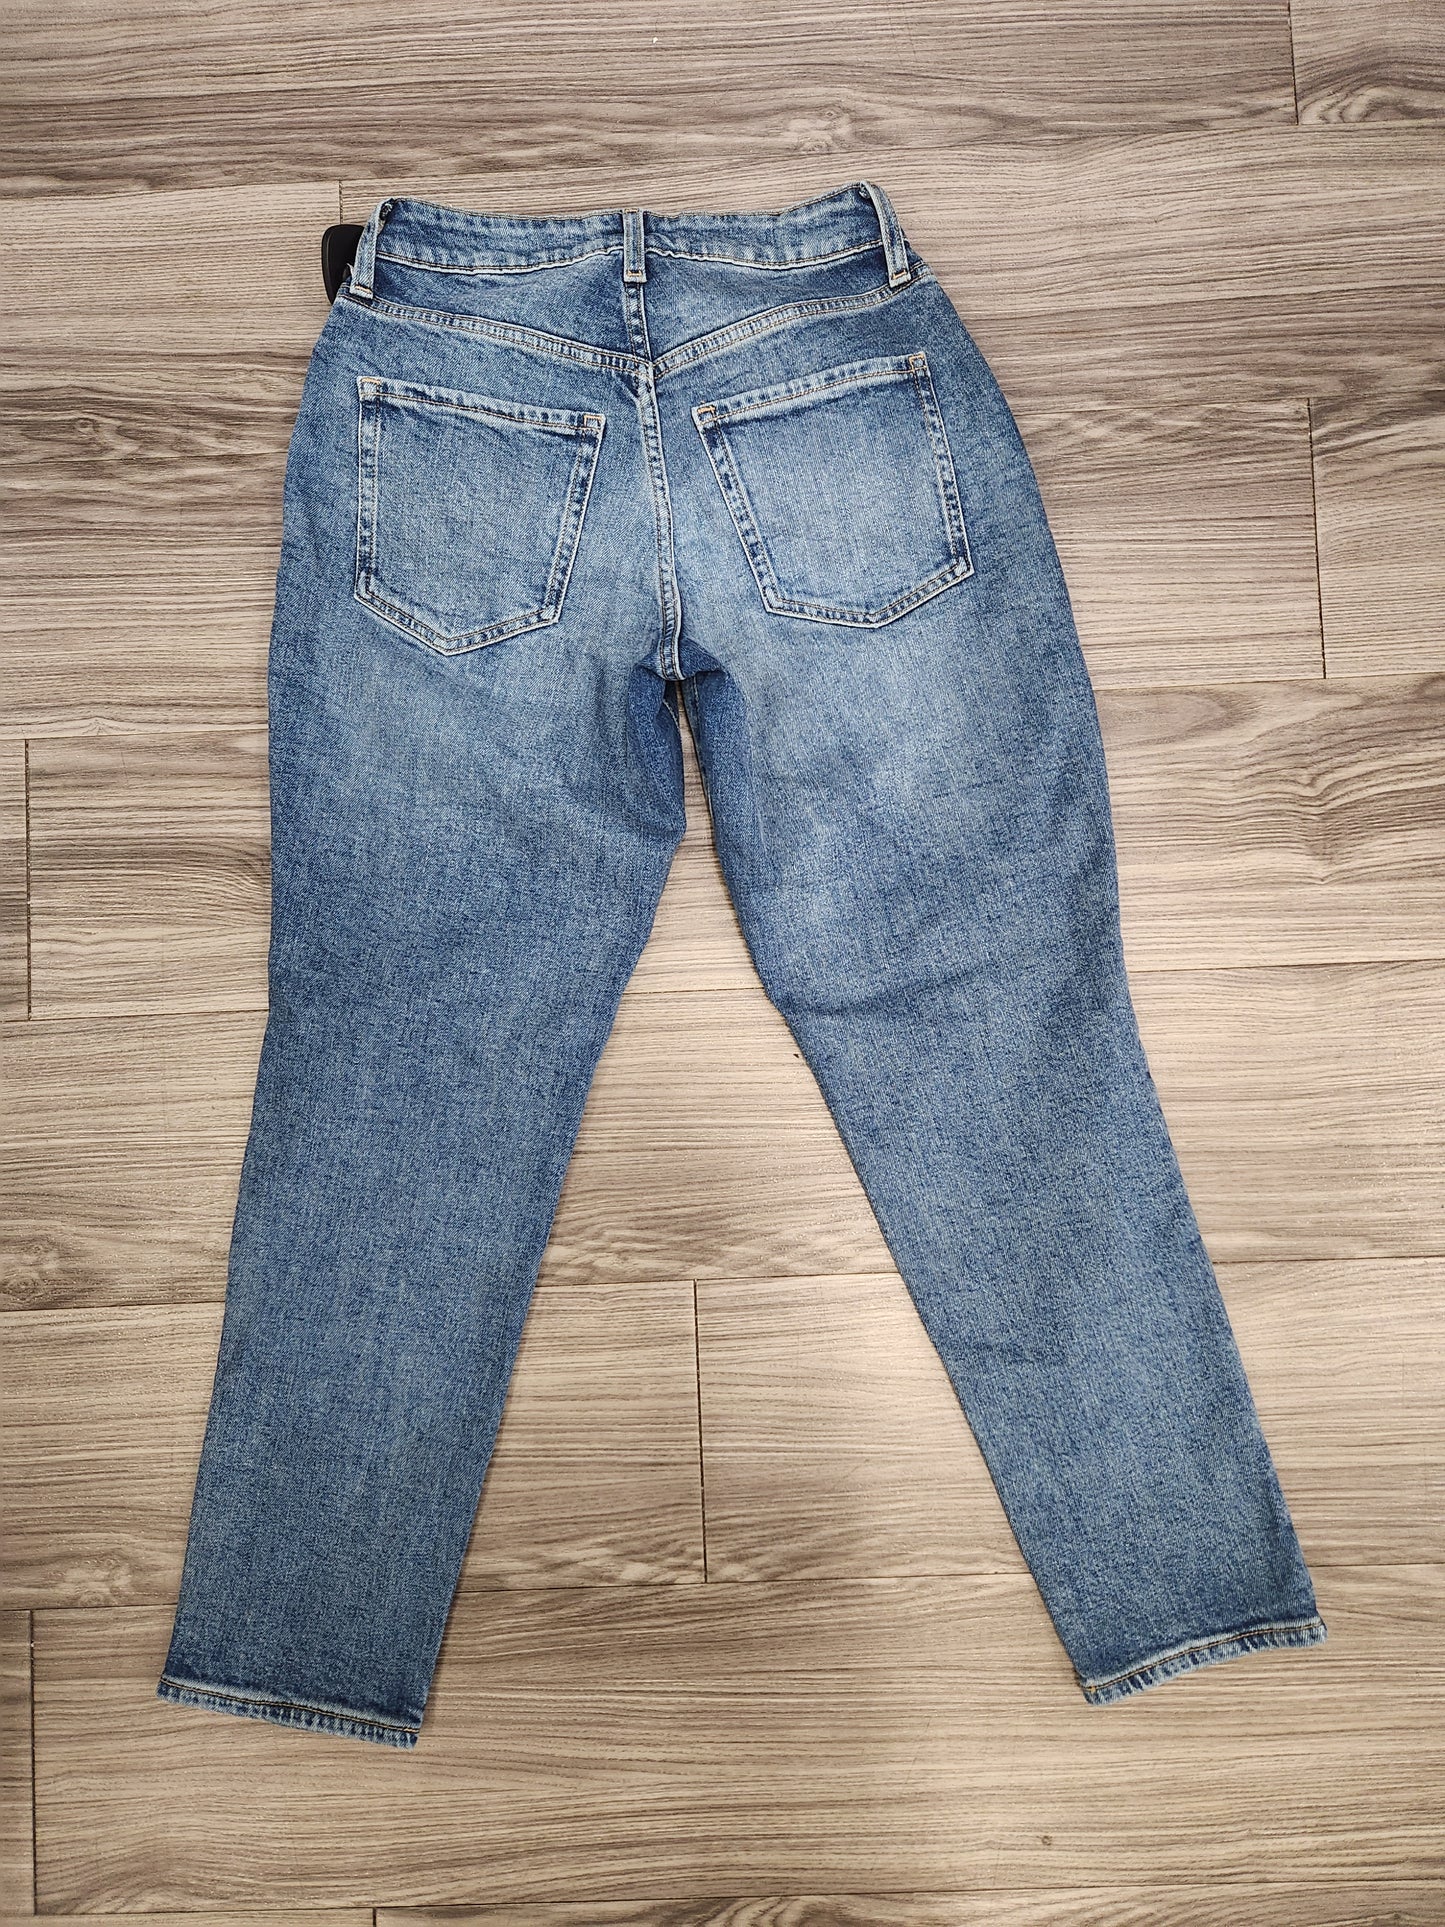 Jeans Relaxed/boyfriend By Old Navy  Size: 2